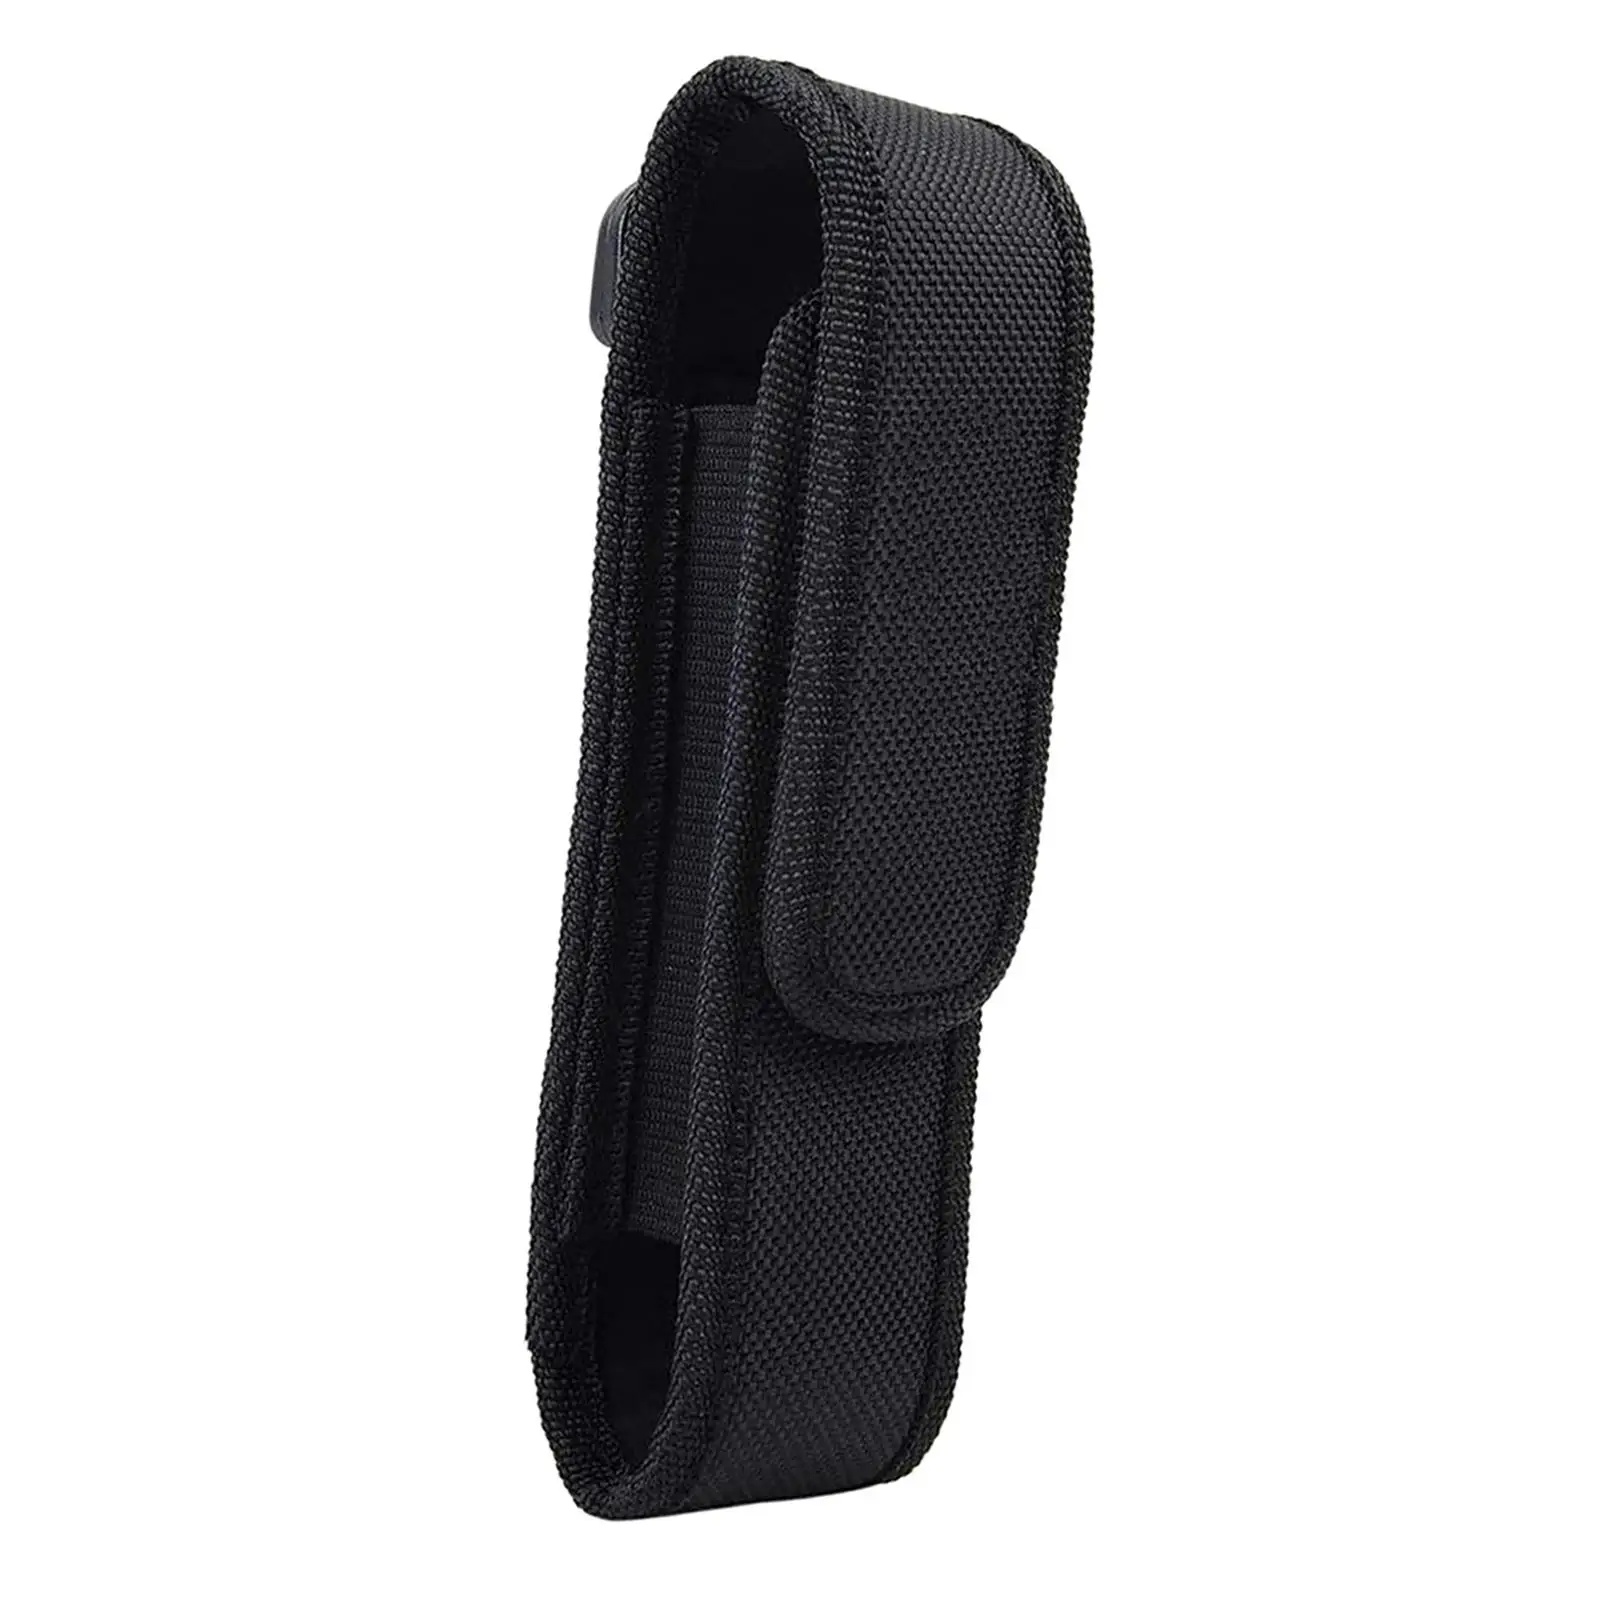 Flashlight Holster Easy to Carry Flashlight Pouch for Hunting Fishing Outdoor Activities